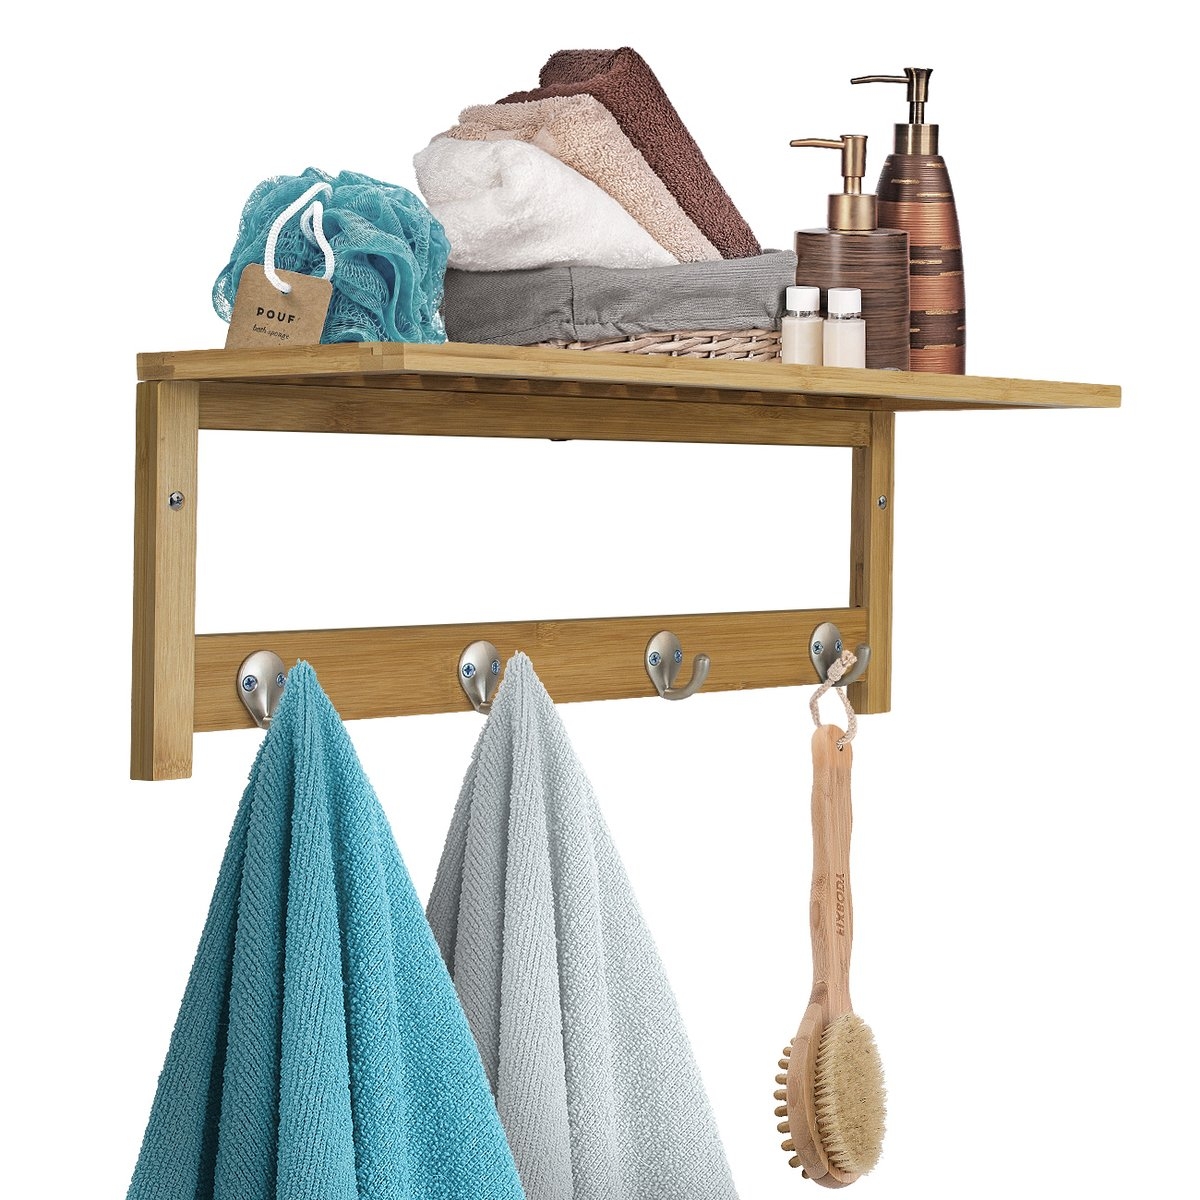 Small Home Traditions Z02227 Rustic Metal Wall Mount Shelf with Towel Bar 